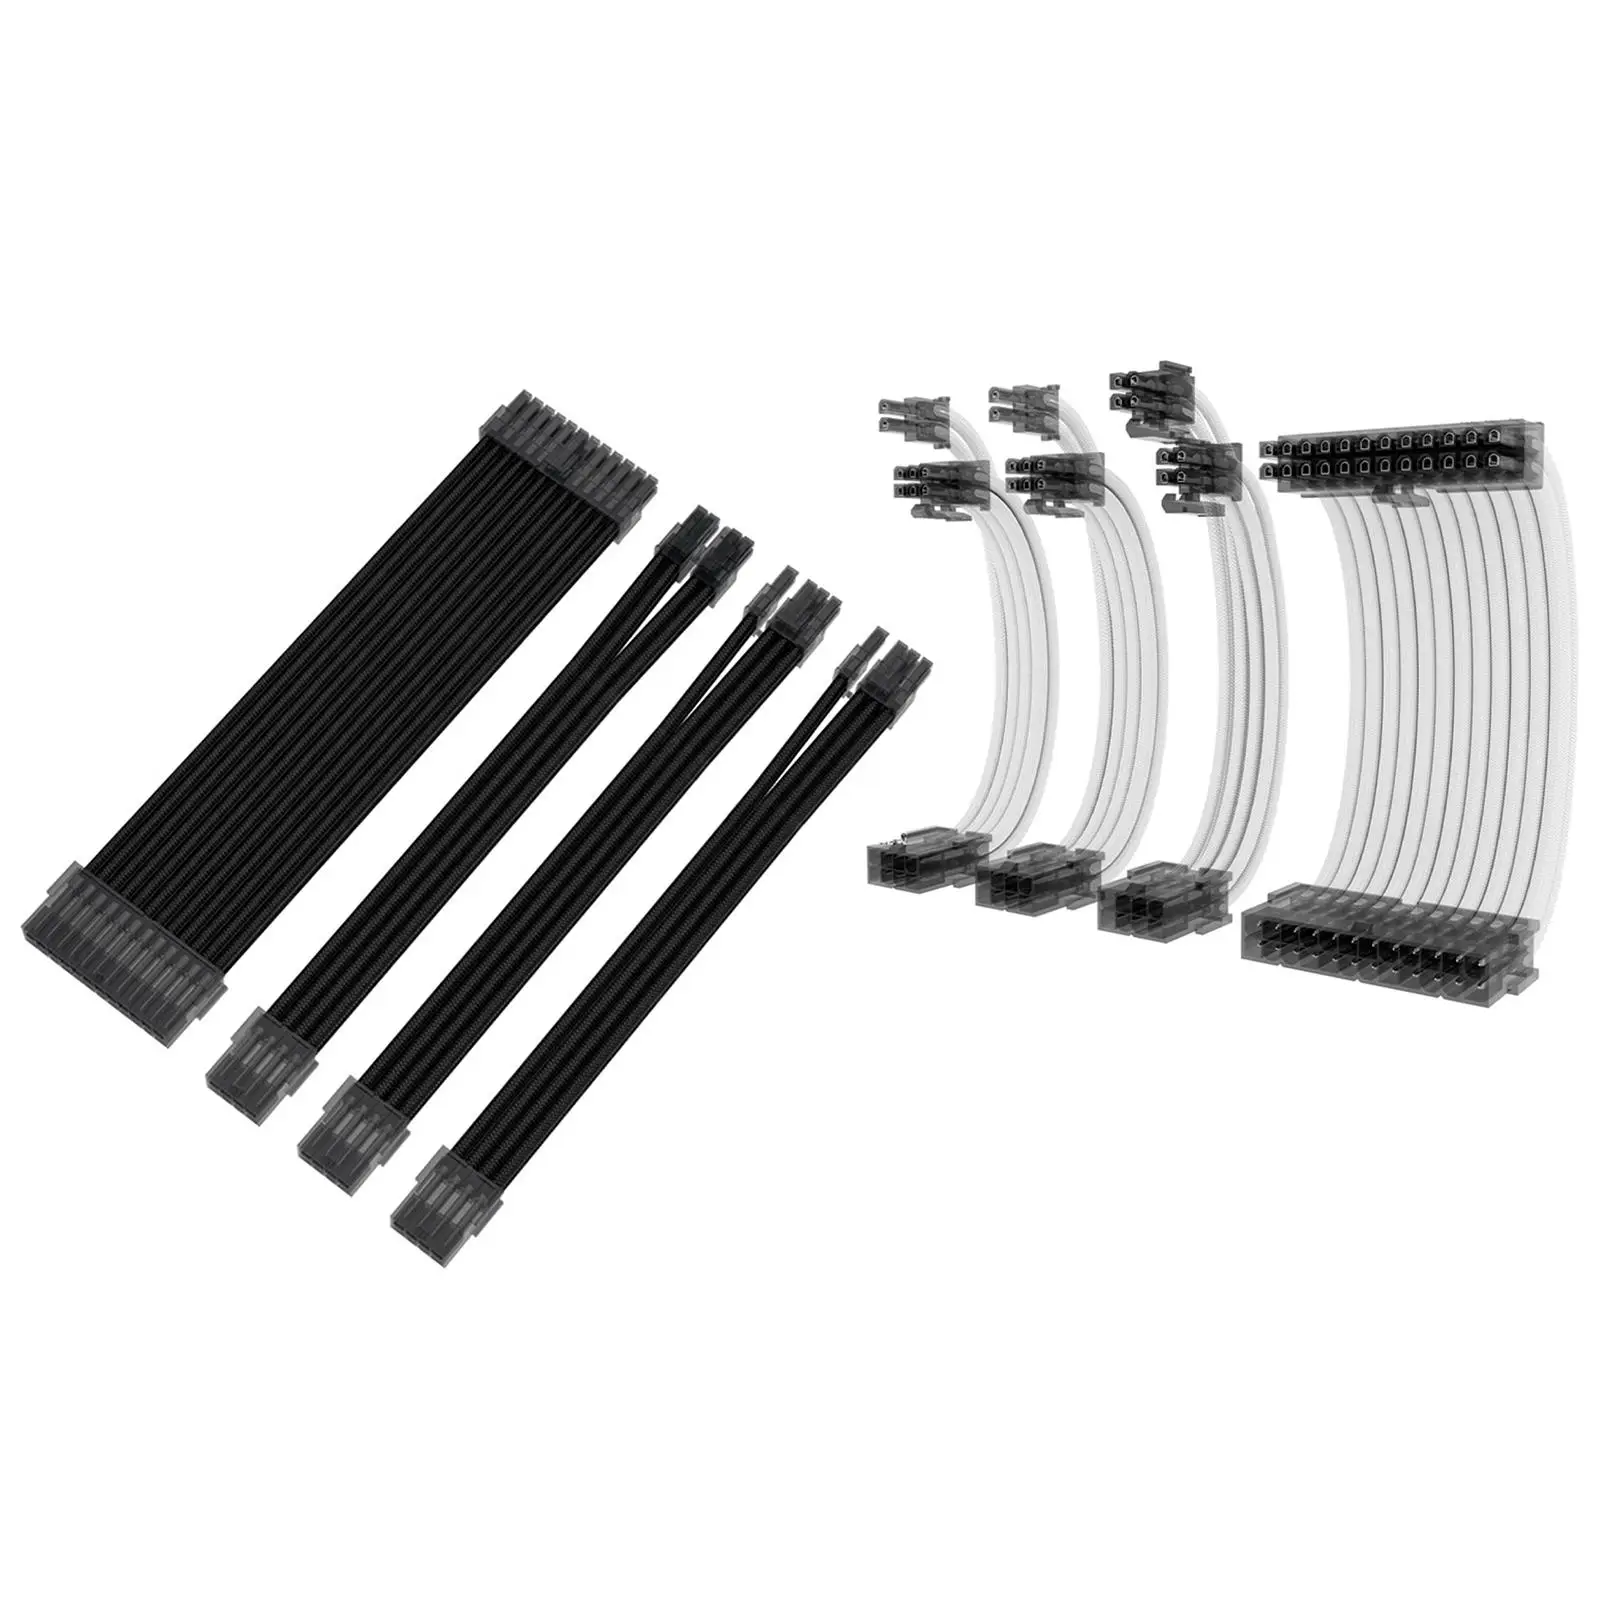 Durable Basic Extension Cable Kit 24Pin Extension Kit Plastic 8Pin Motherboard Extension Power Cord Converter for Computer PC